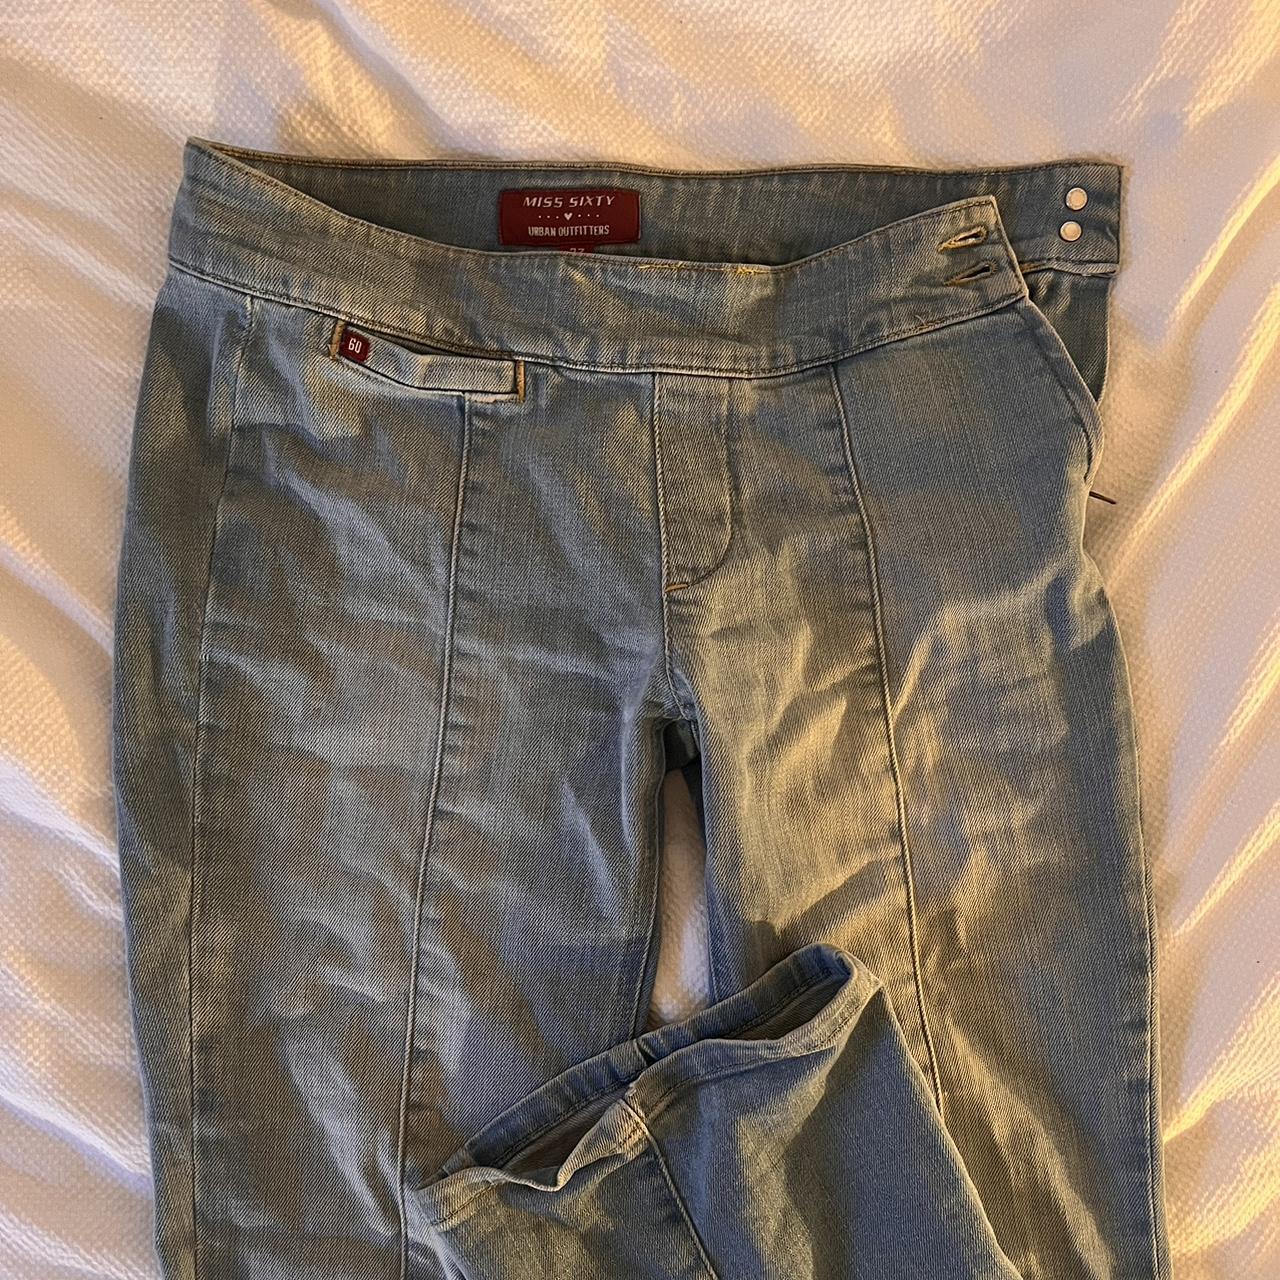 Miss sixty low rise by urban outfitters Size 27... - Depop